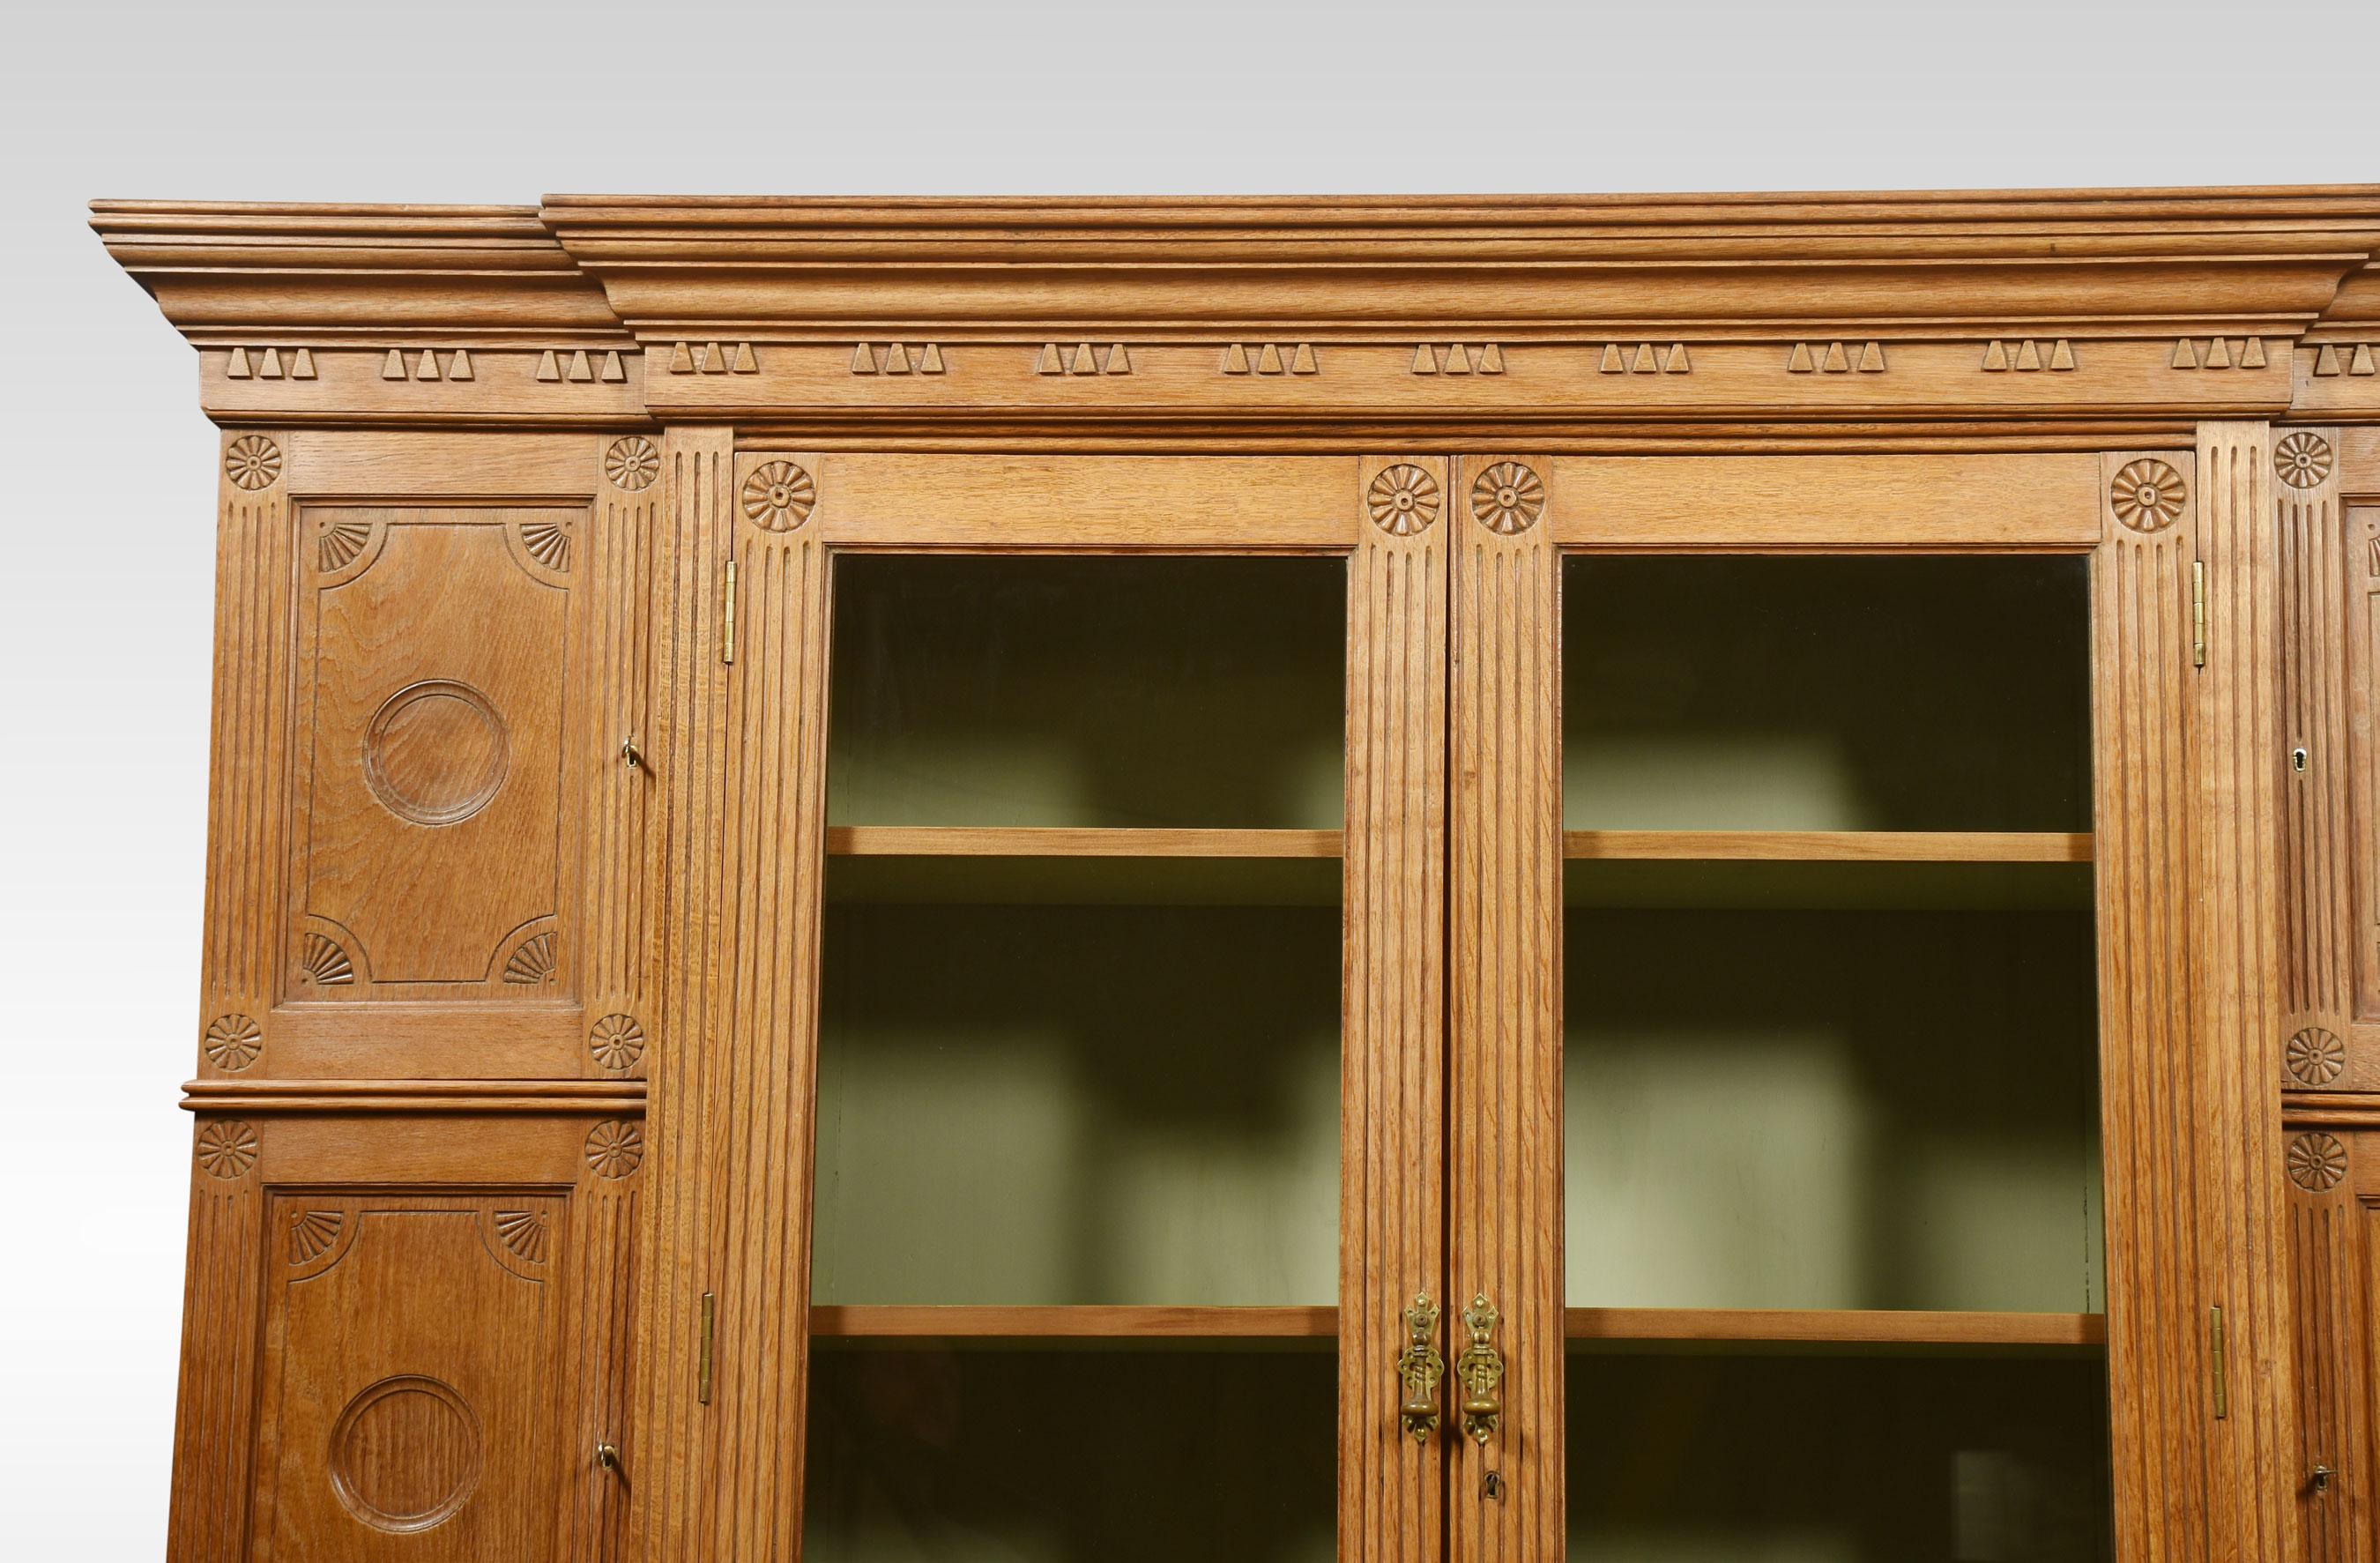 19th-century oak kitchen cupboard, the carved moulded cornice above two large glazed doors opening to reveal an adjustable shelved interior having two drawers below. Flanked by three panelled doors with circular carved detail. The base section is